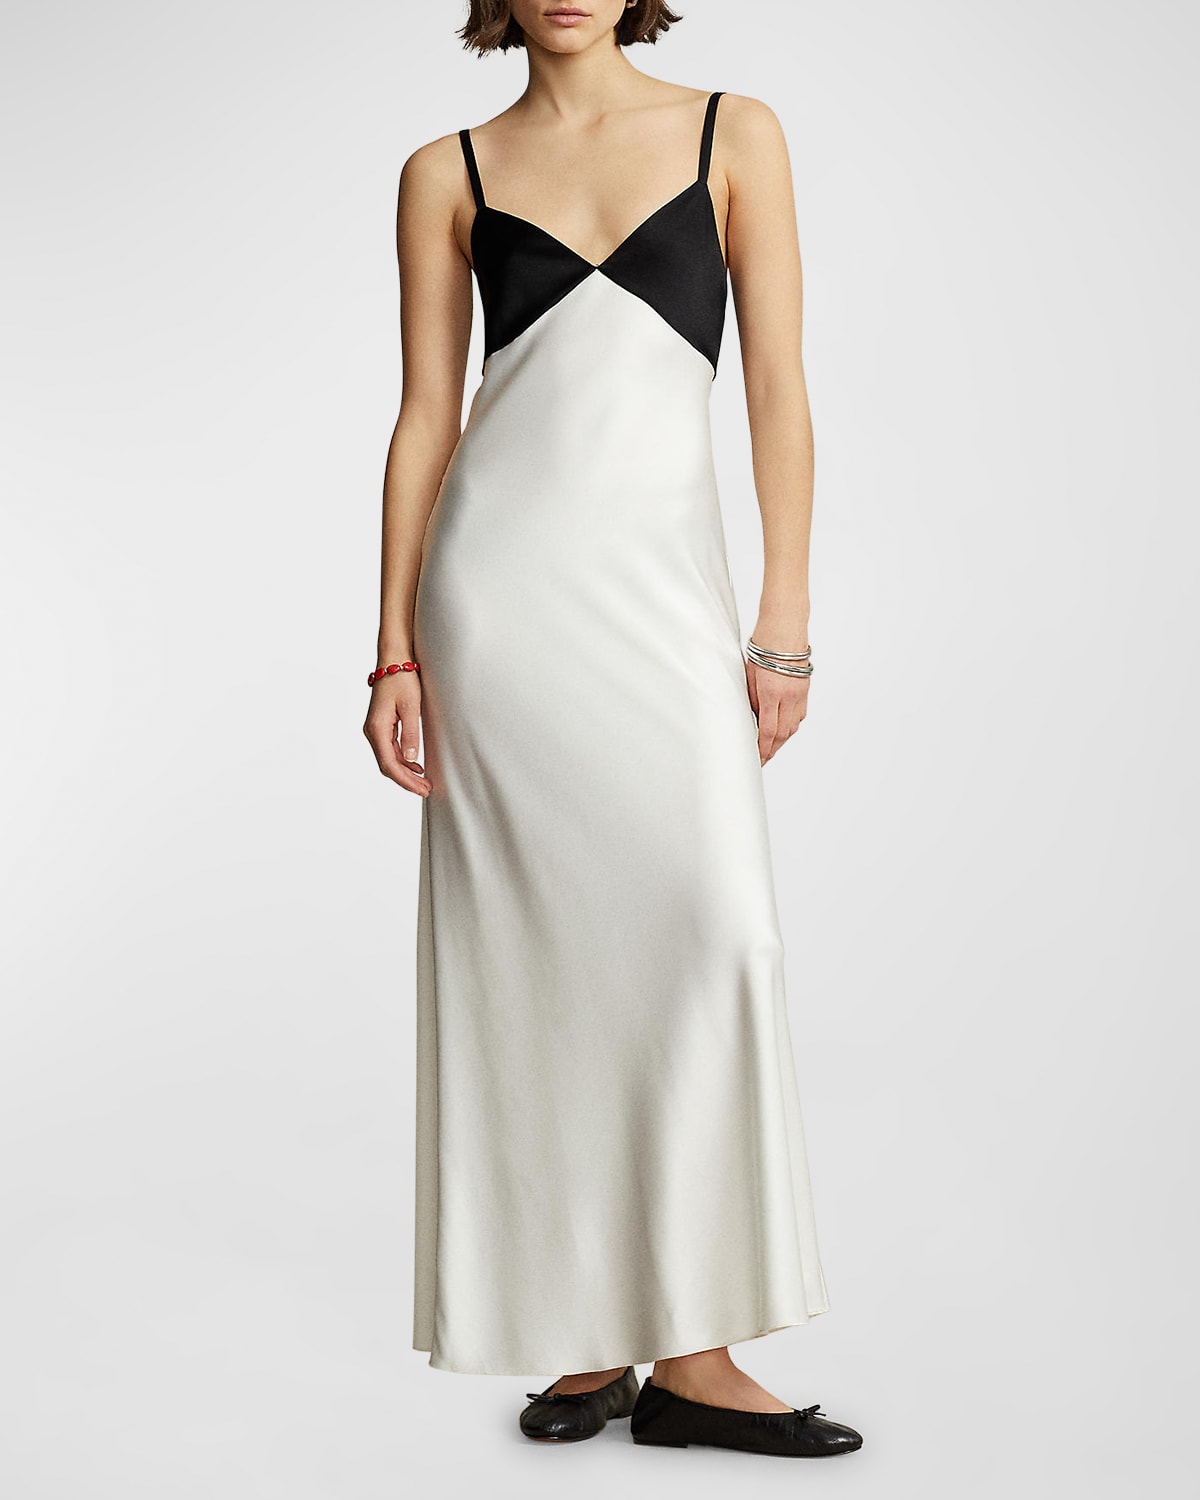 Contrast Satin Sleeveless Gown